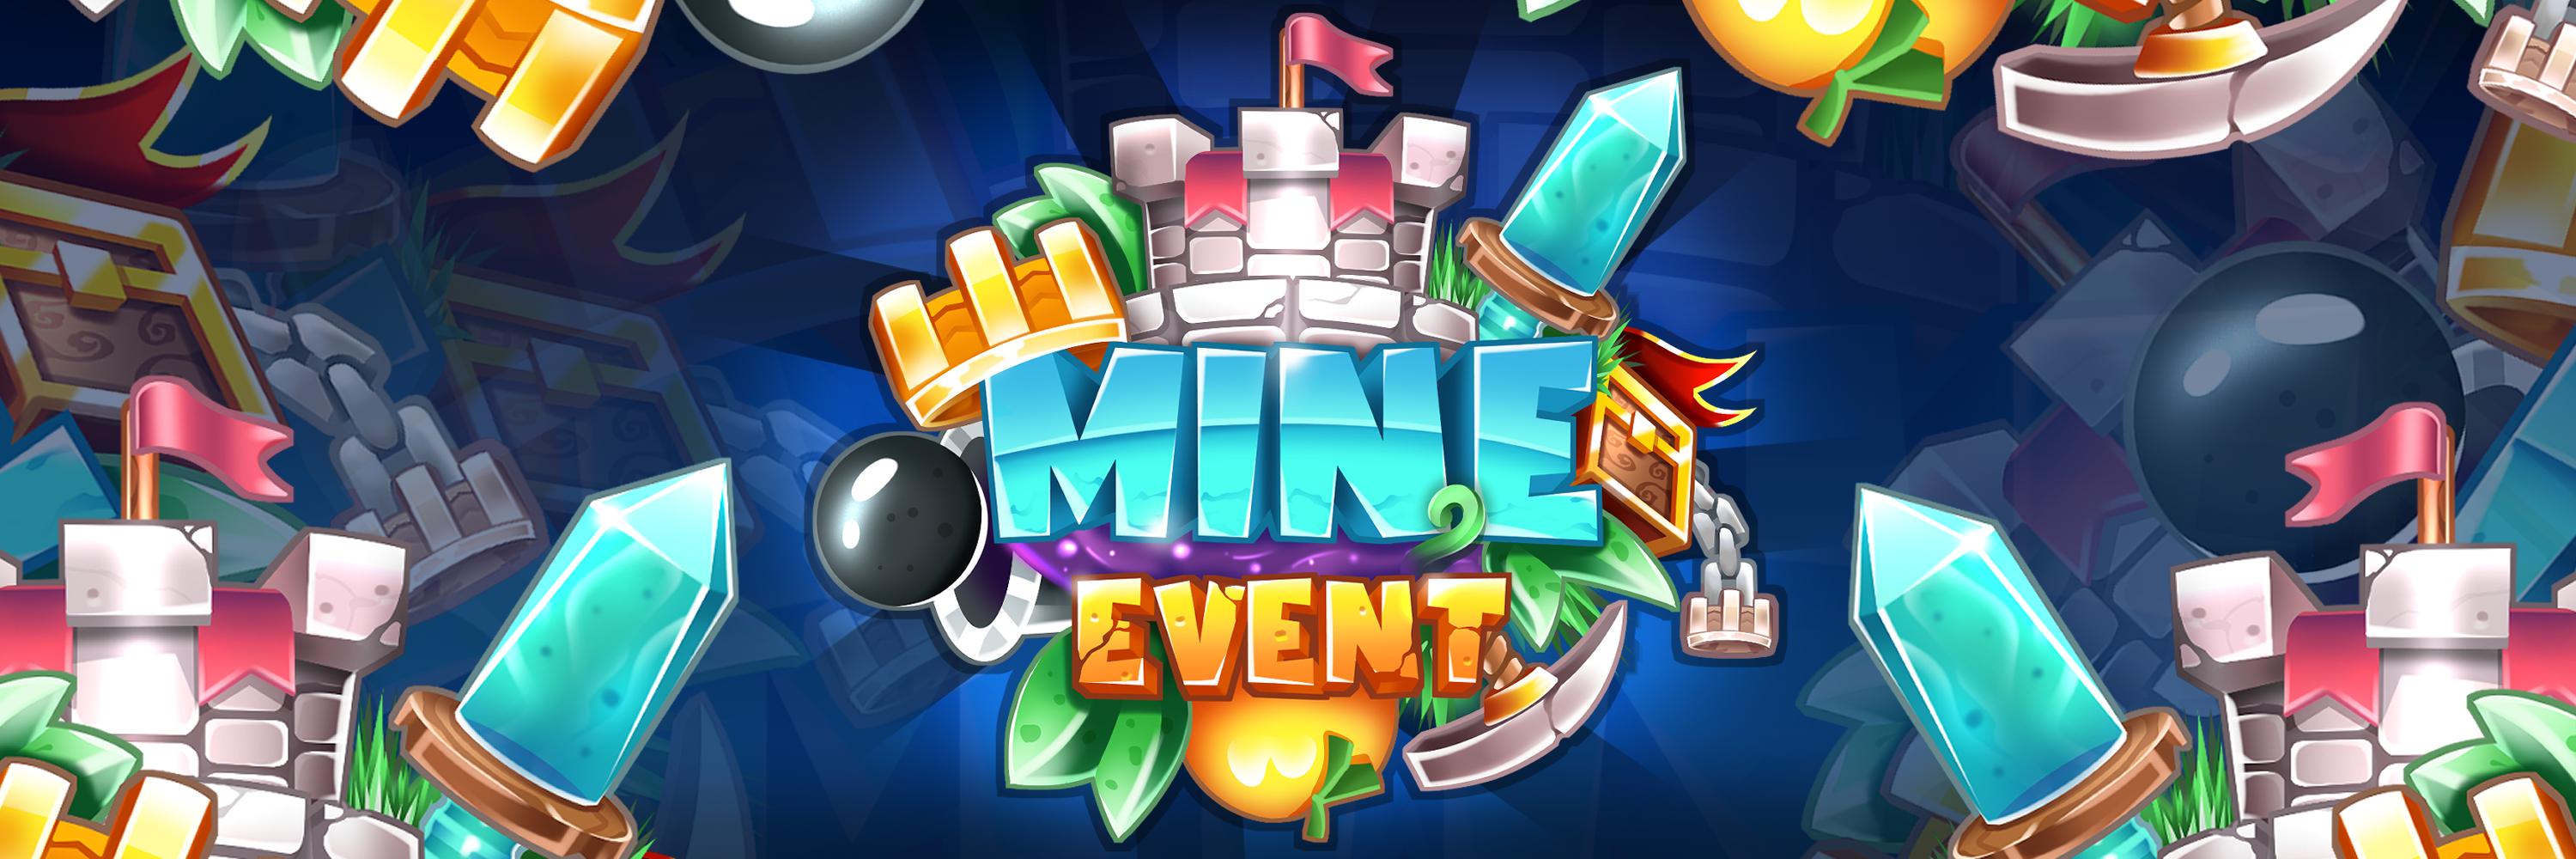 Mine event banniere.png